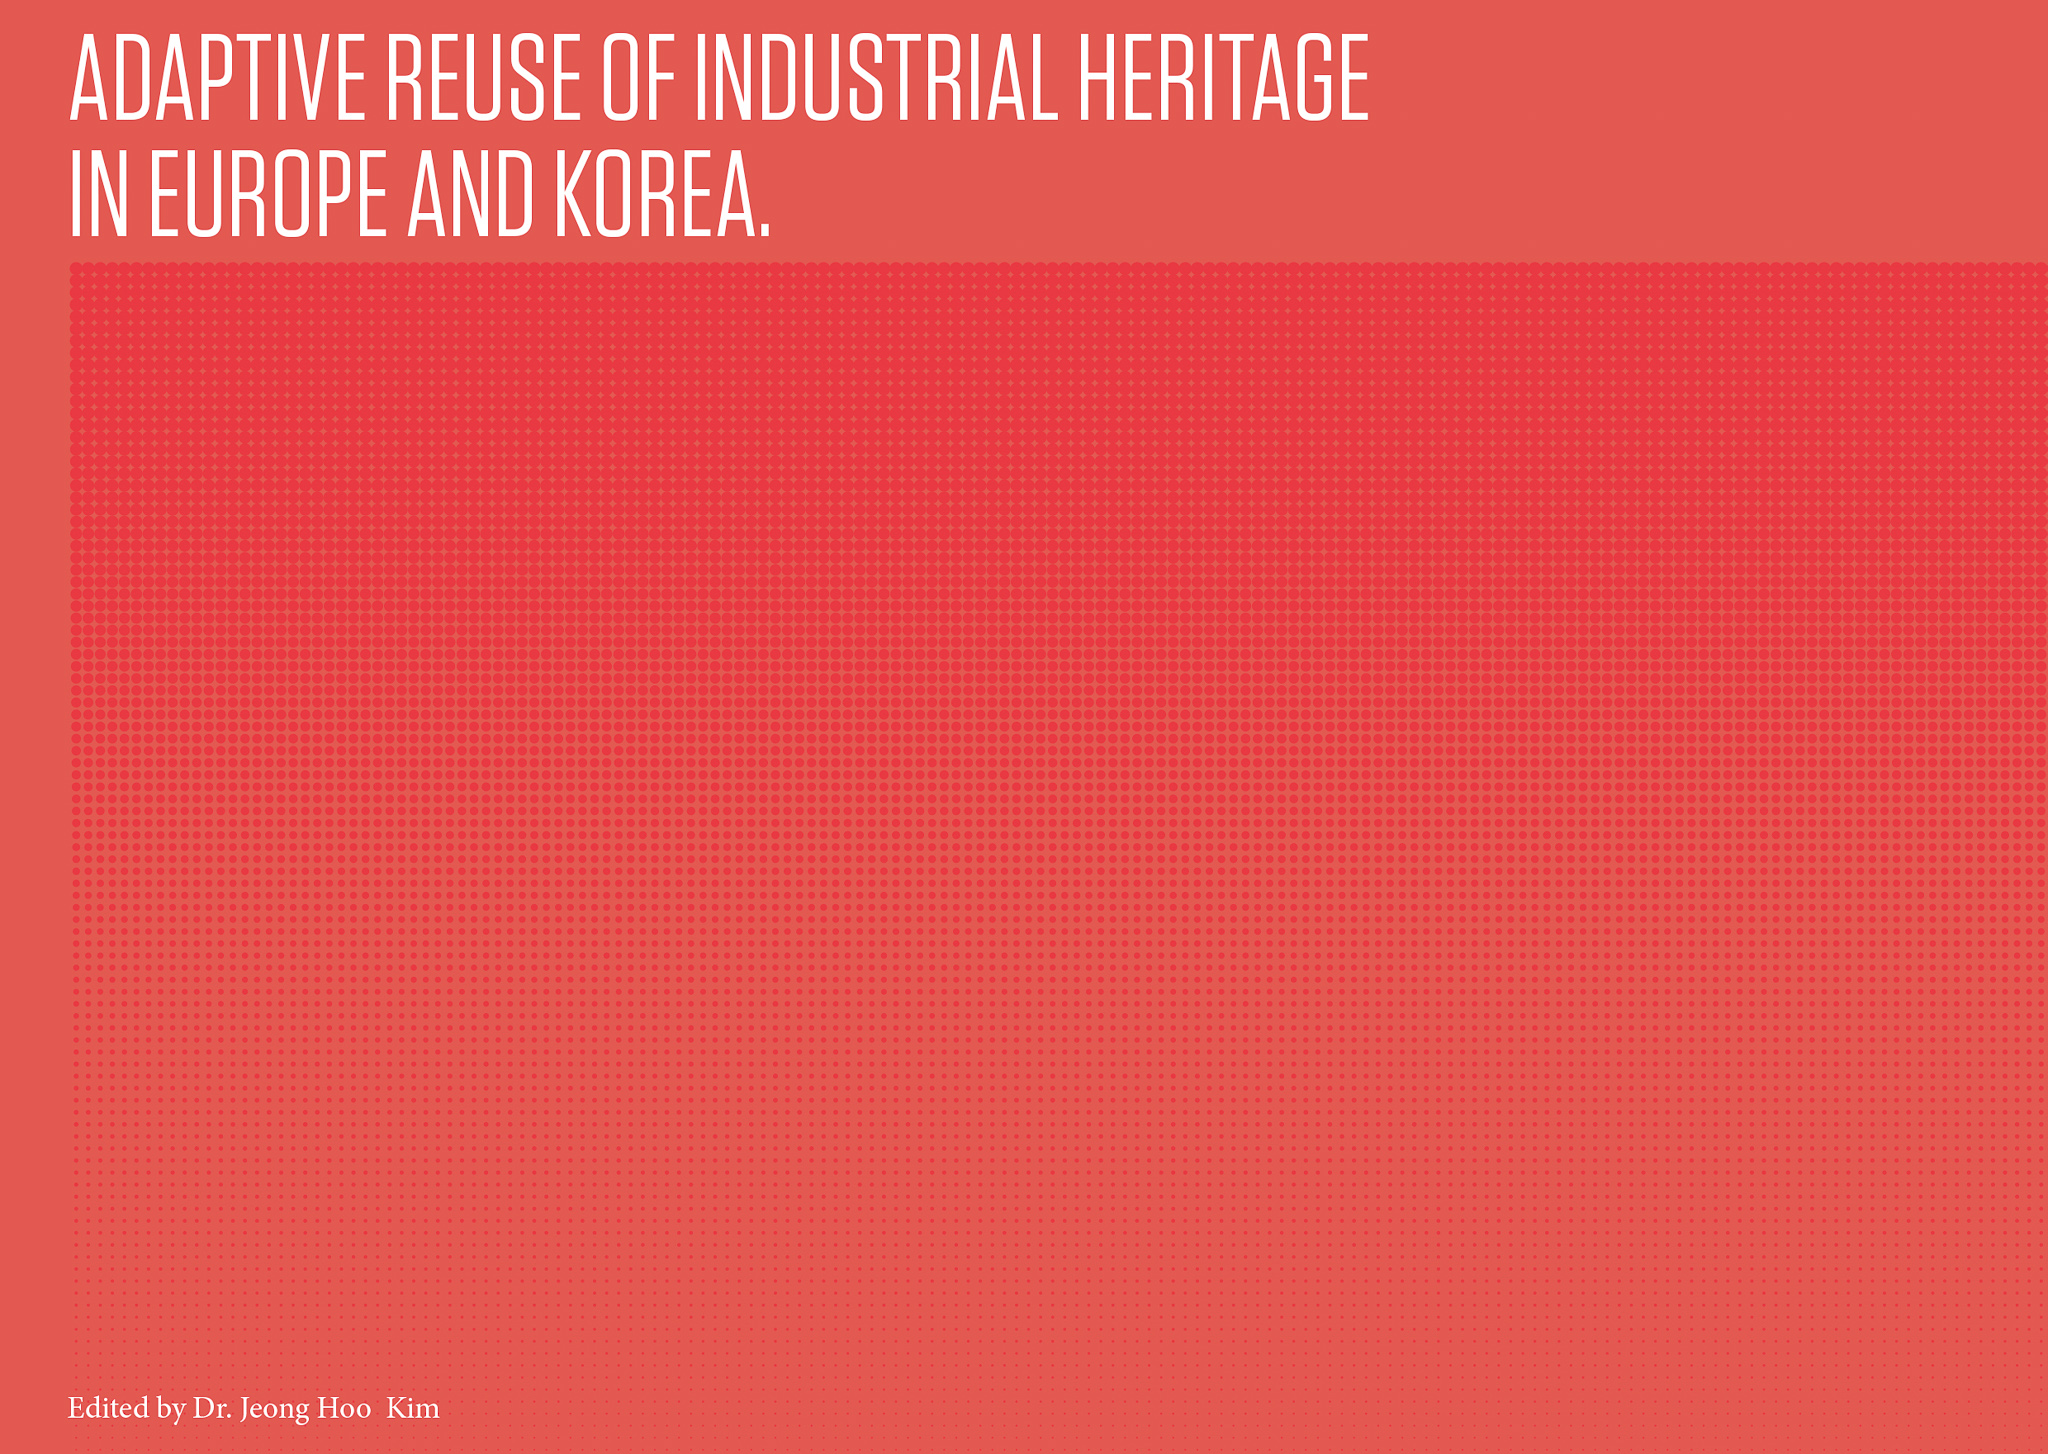 Adaptive Reuse of Industrial Heritage in Europe and Korea